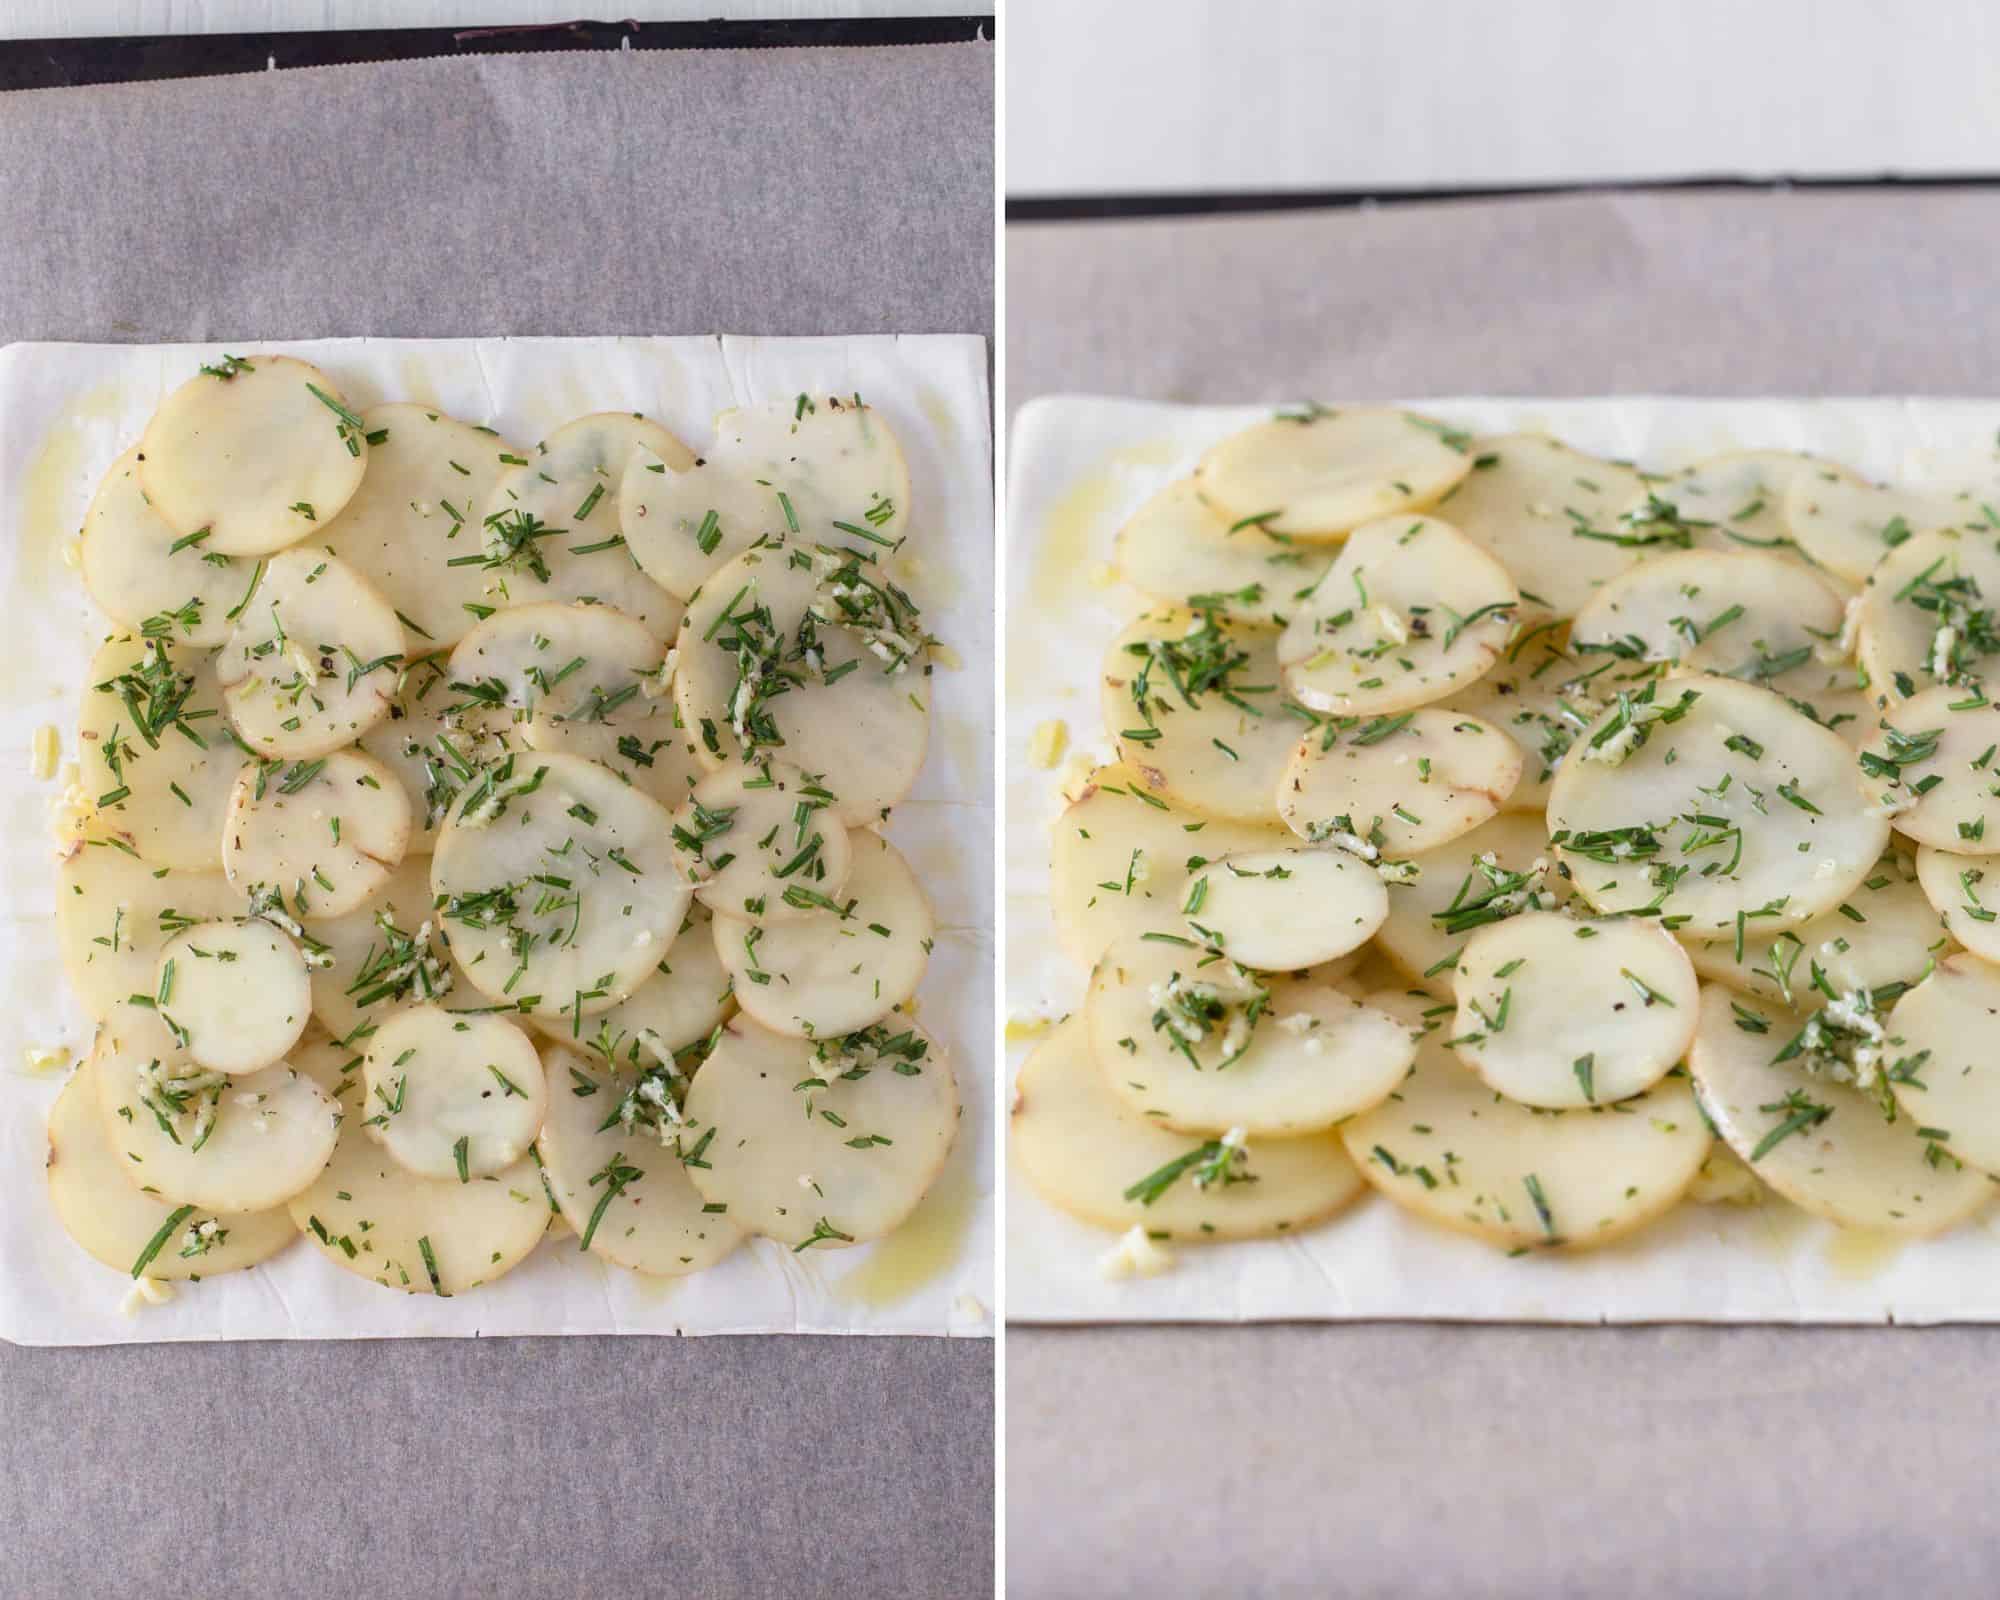 Potatoes arranged over pastry sheet.